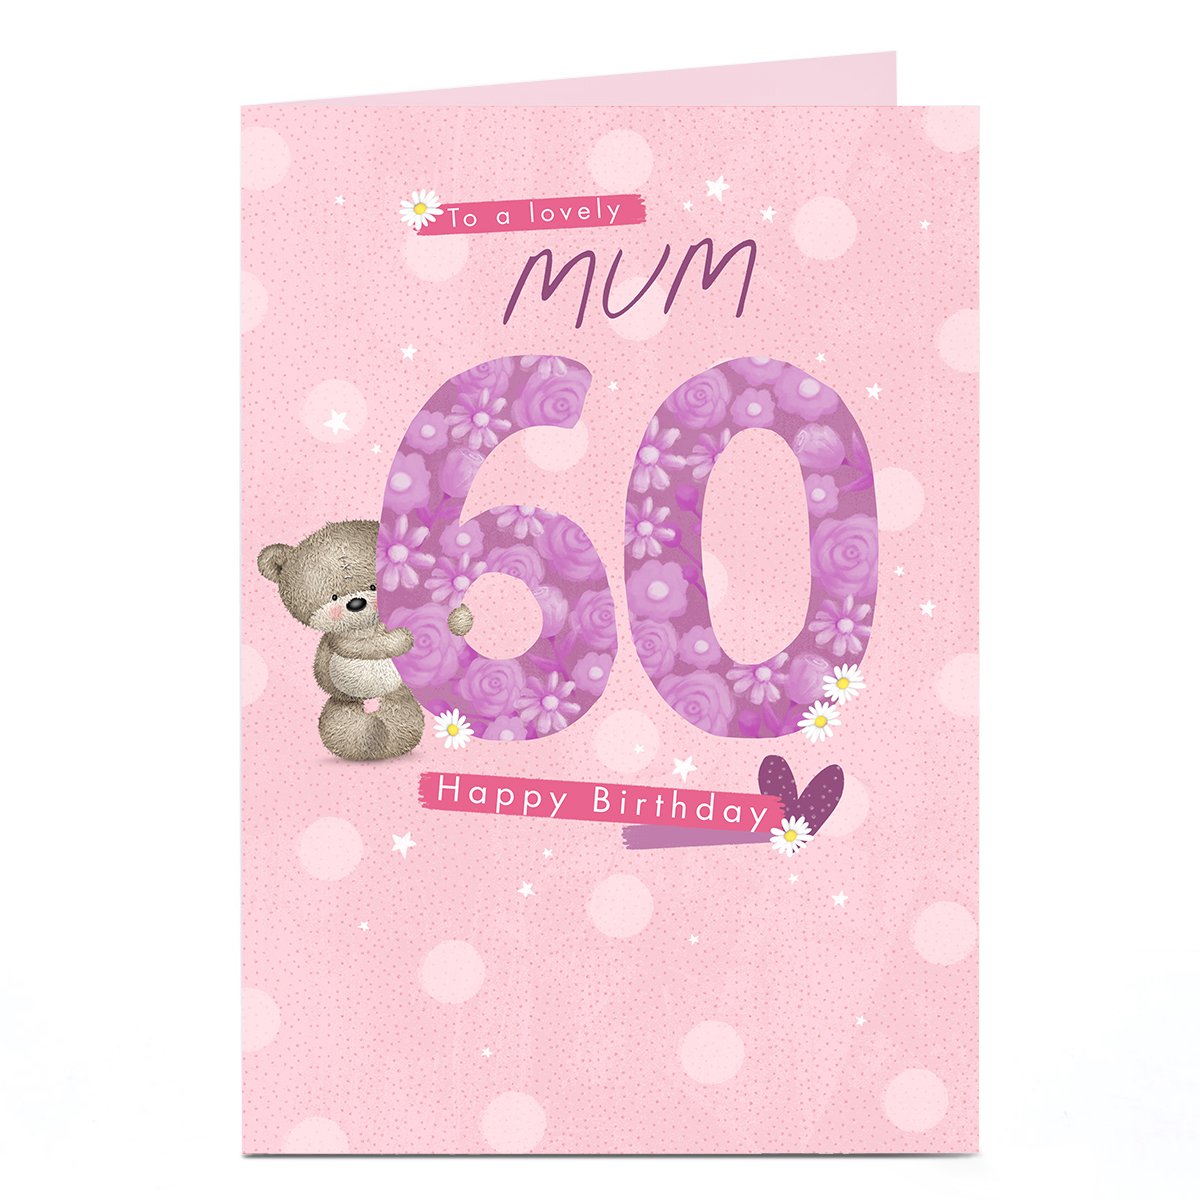 Hugs Bear Personalised 60th Birthday Card - To A Lovely...